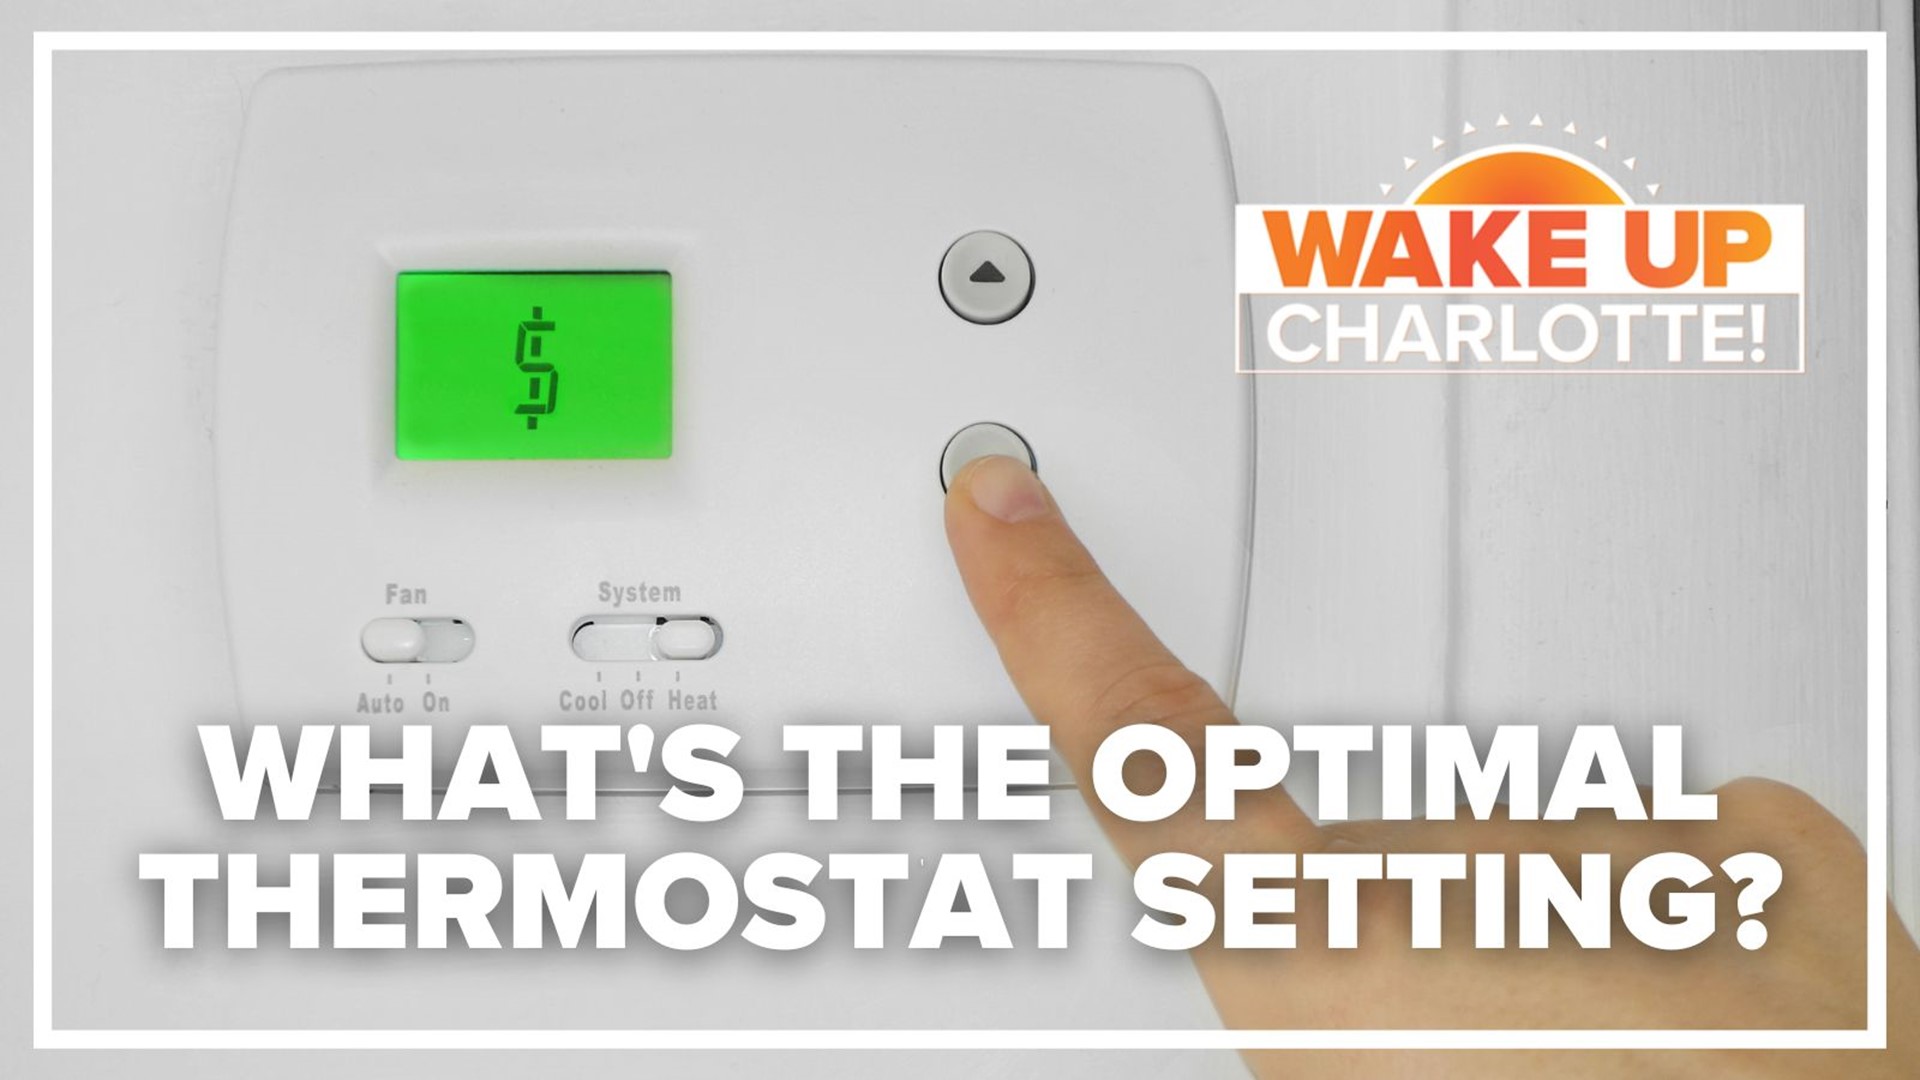 If you're looking to save some money and help the environment, the federal government has some recommendations. But you'll have to crank your thermostat this summer.